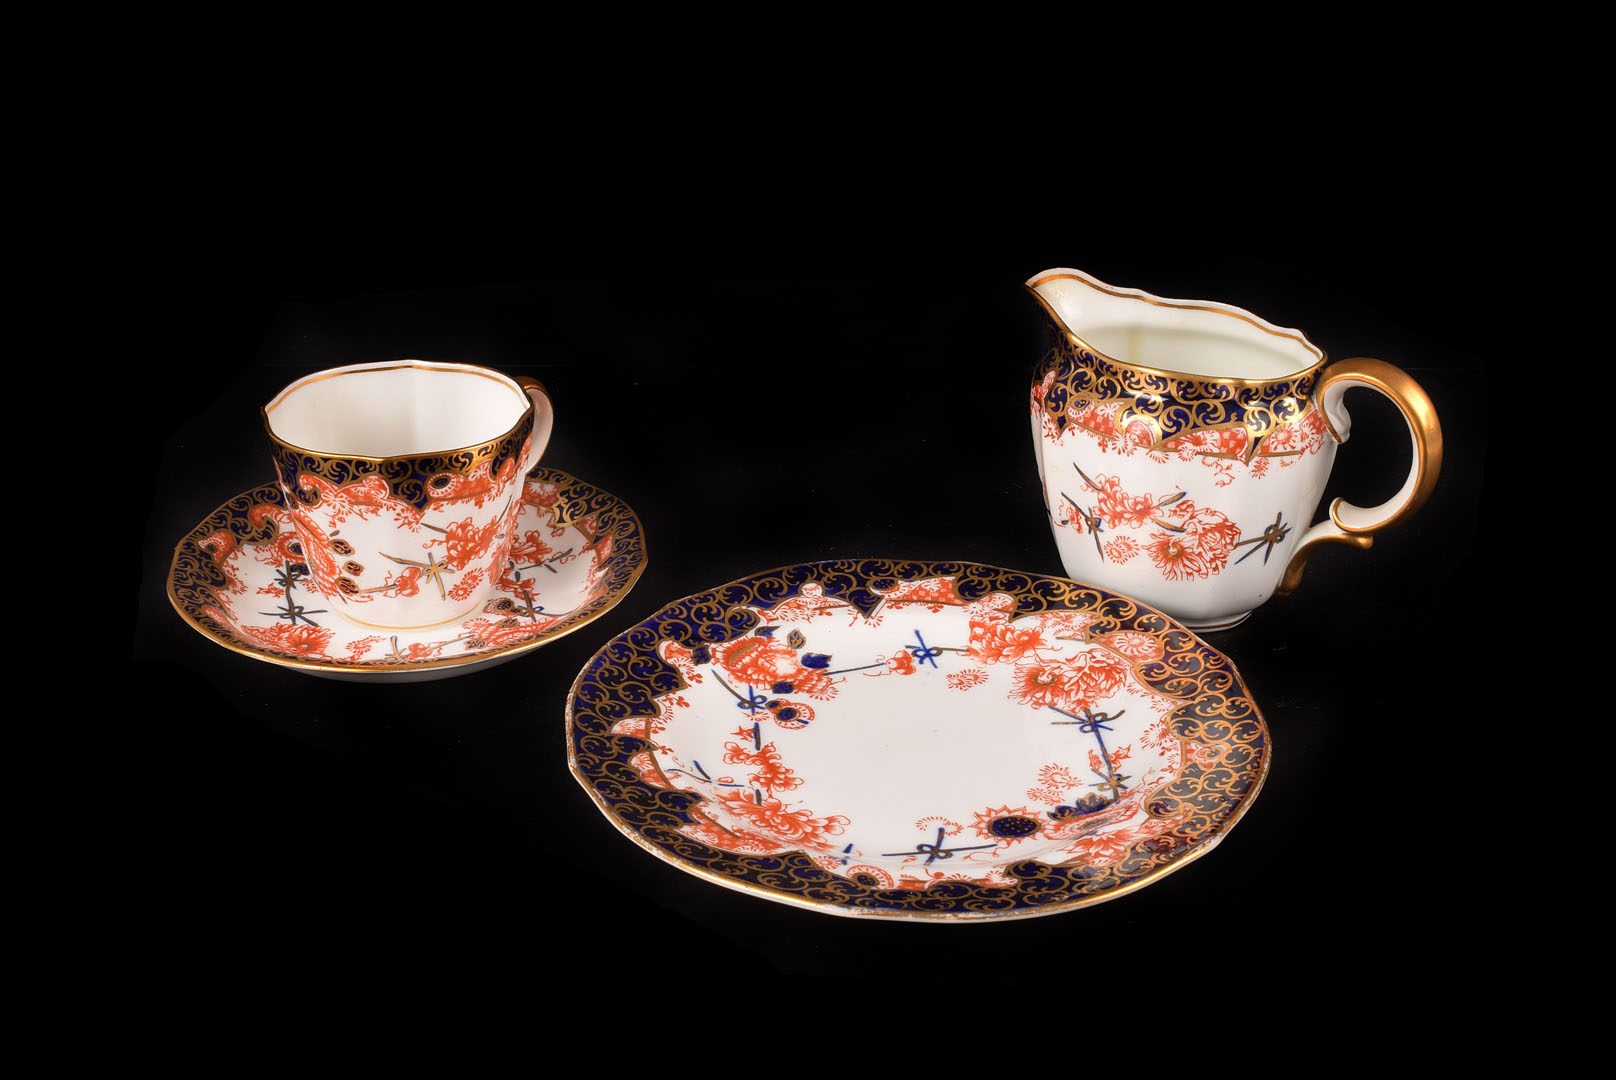 A Royal Crown Derby Part Tea service, with floral pattern of red chrysanthemums and a blue border